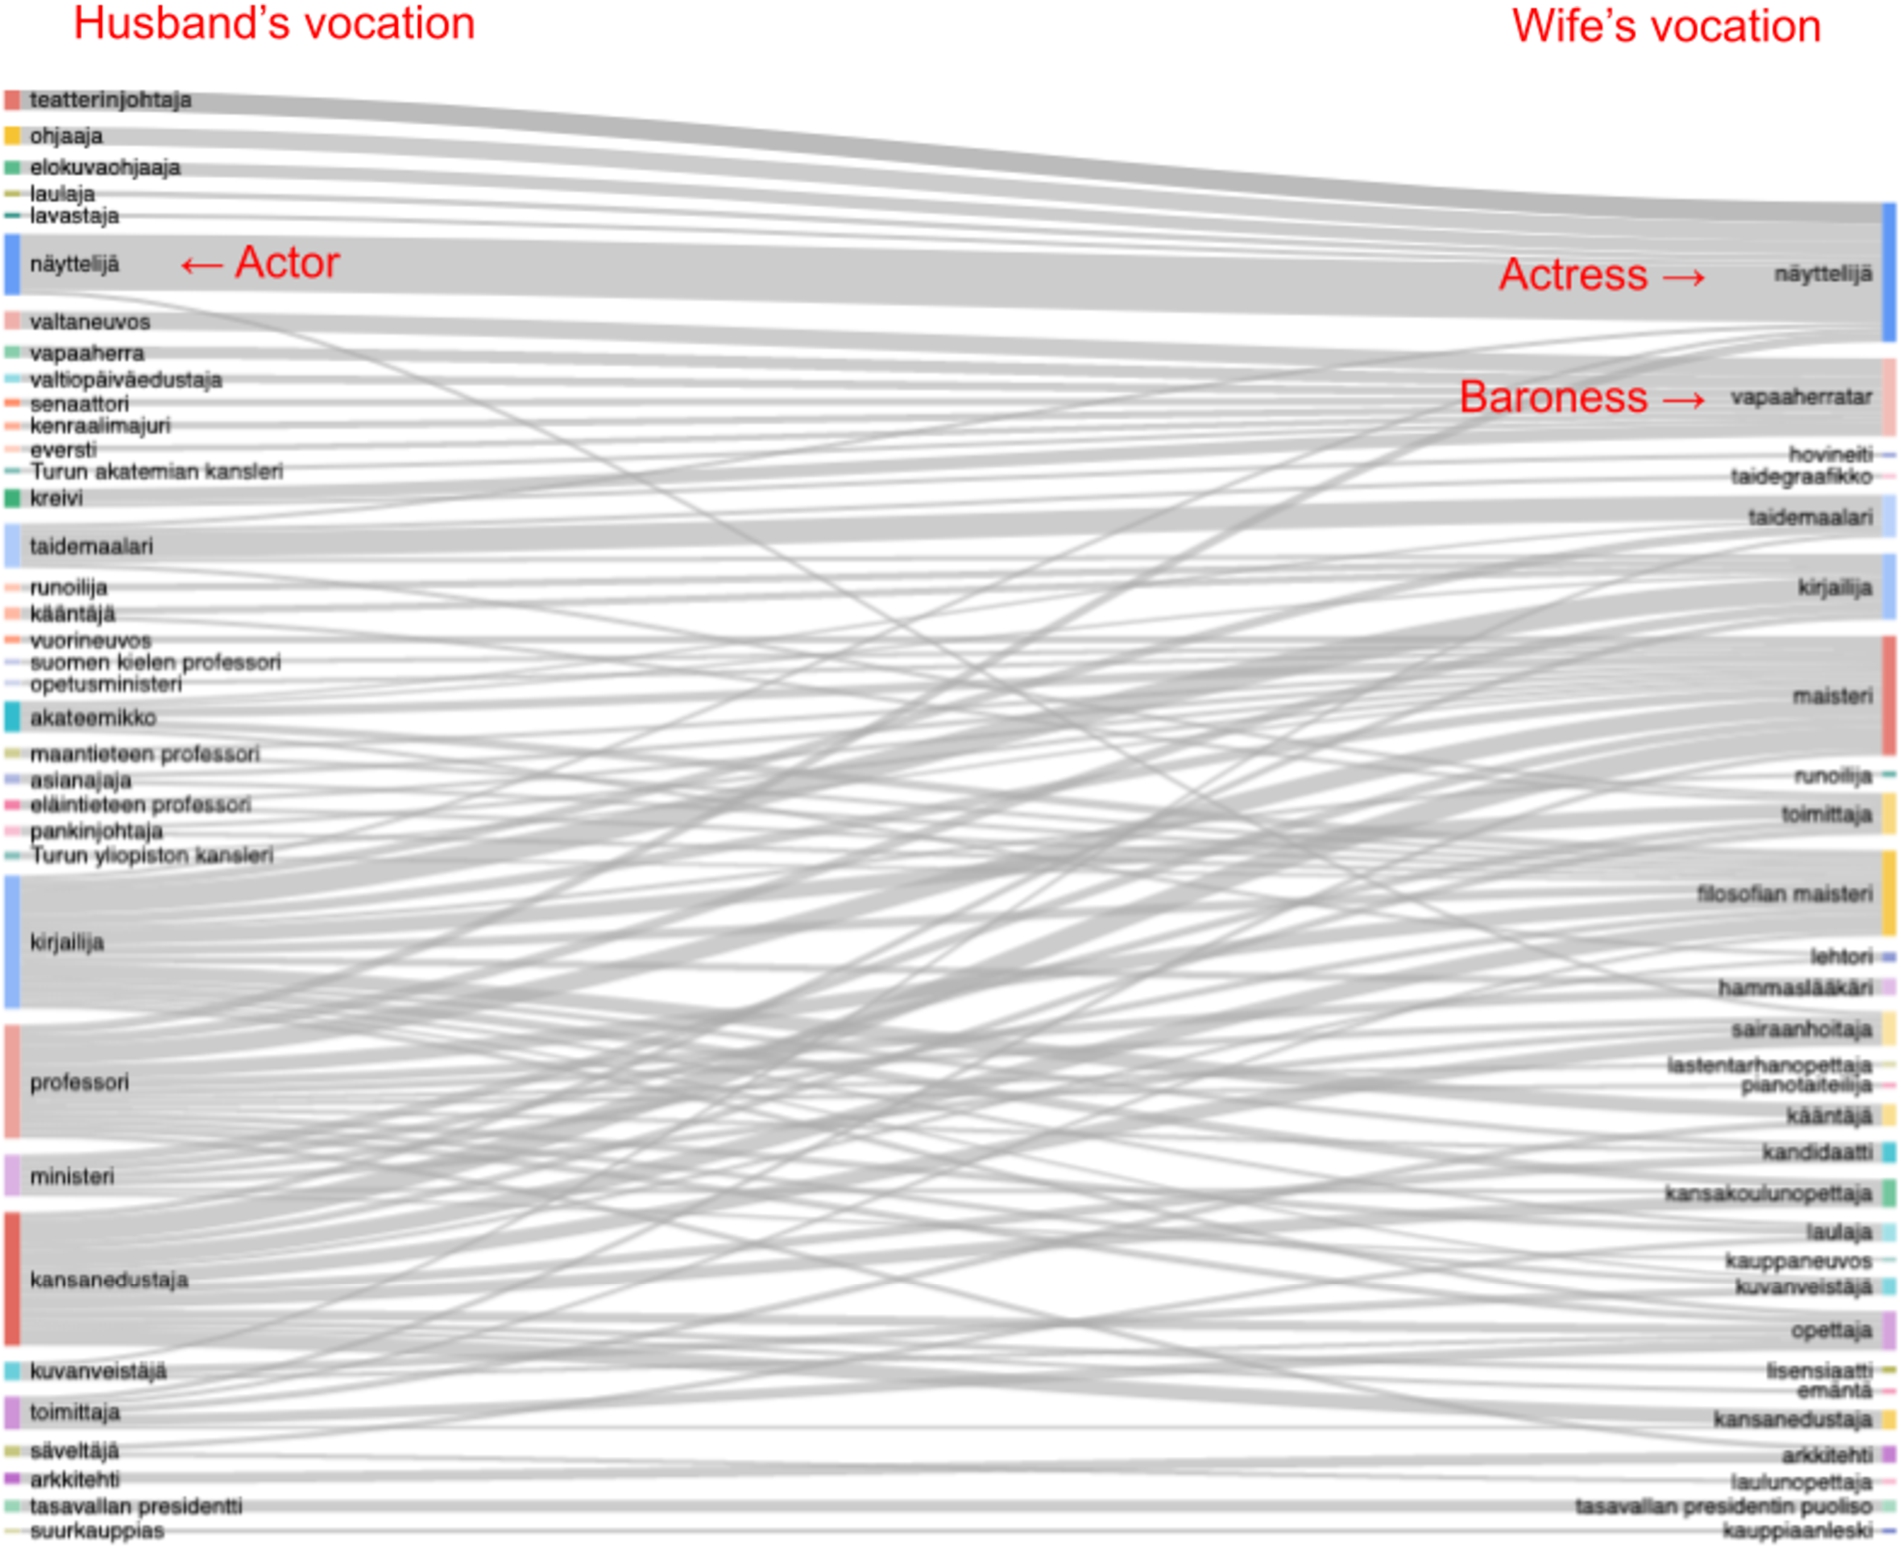 Sankey diagram depicting the correlations between the vocations of husbands and wifes; screenshot from the BiographySampo portal with English translations in red text.